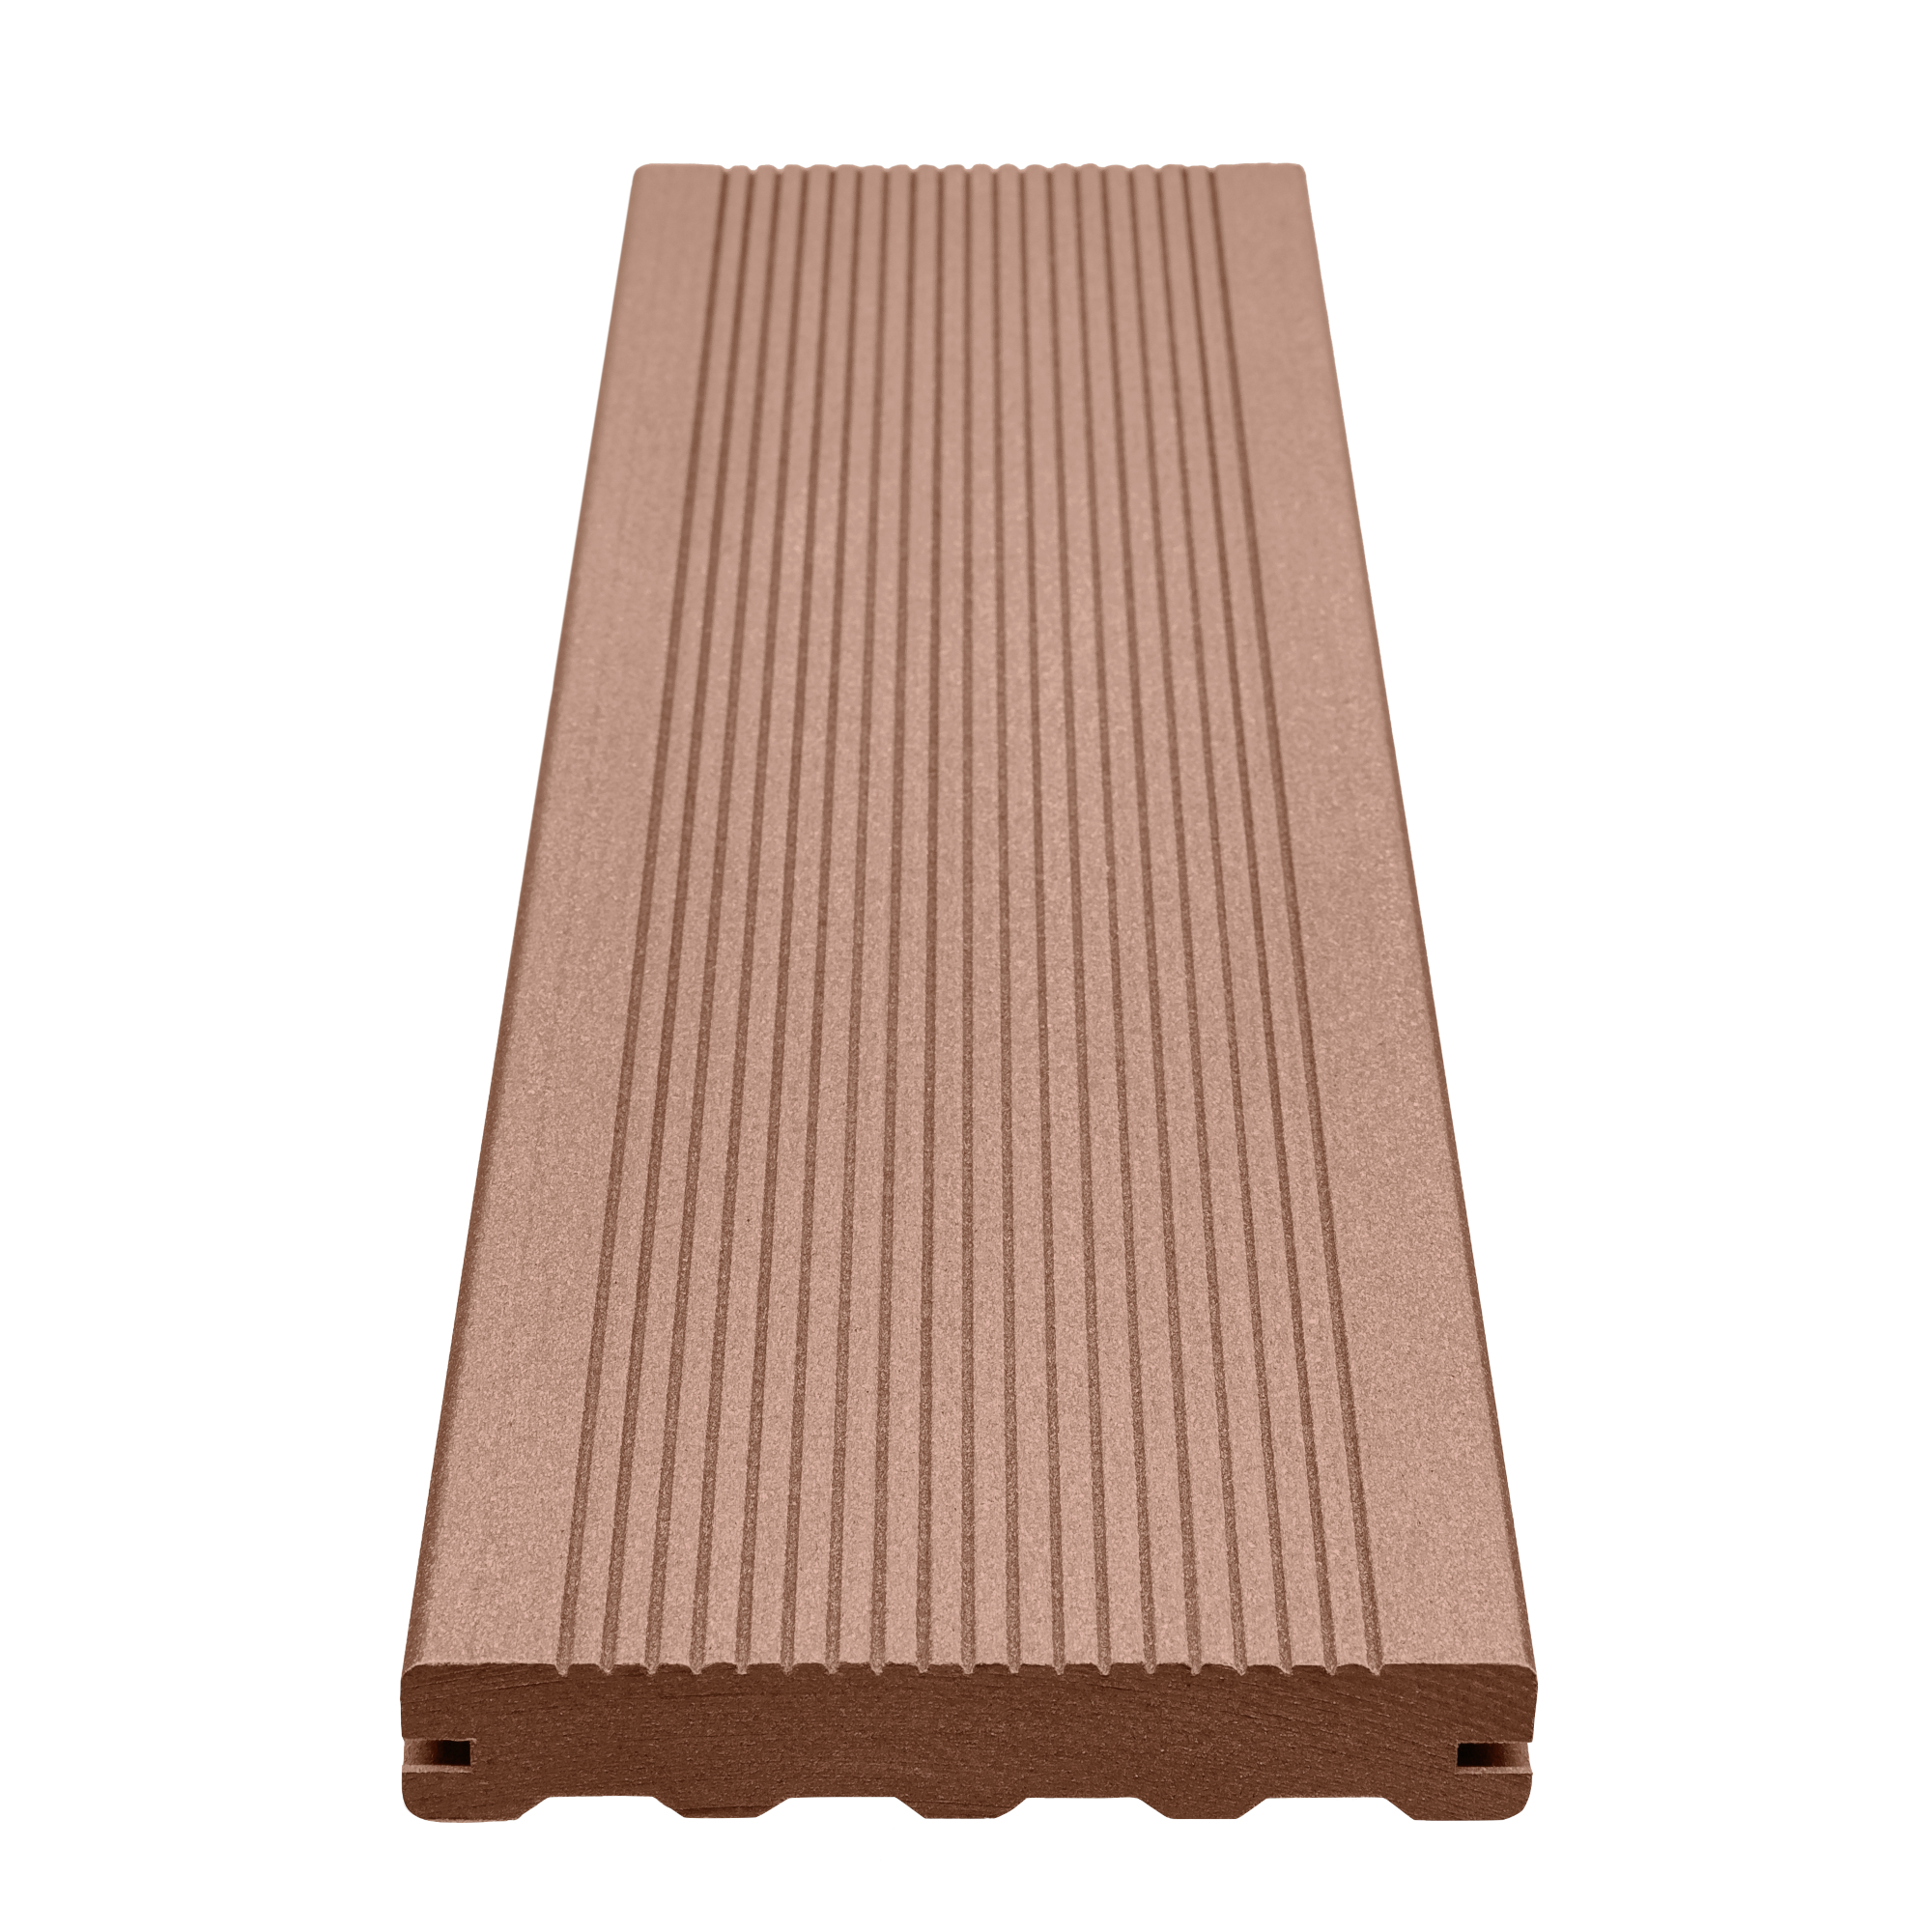 Prkno terasové Terafest Classic GROOVE palisander 23×137×4 000 mm